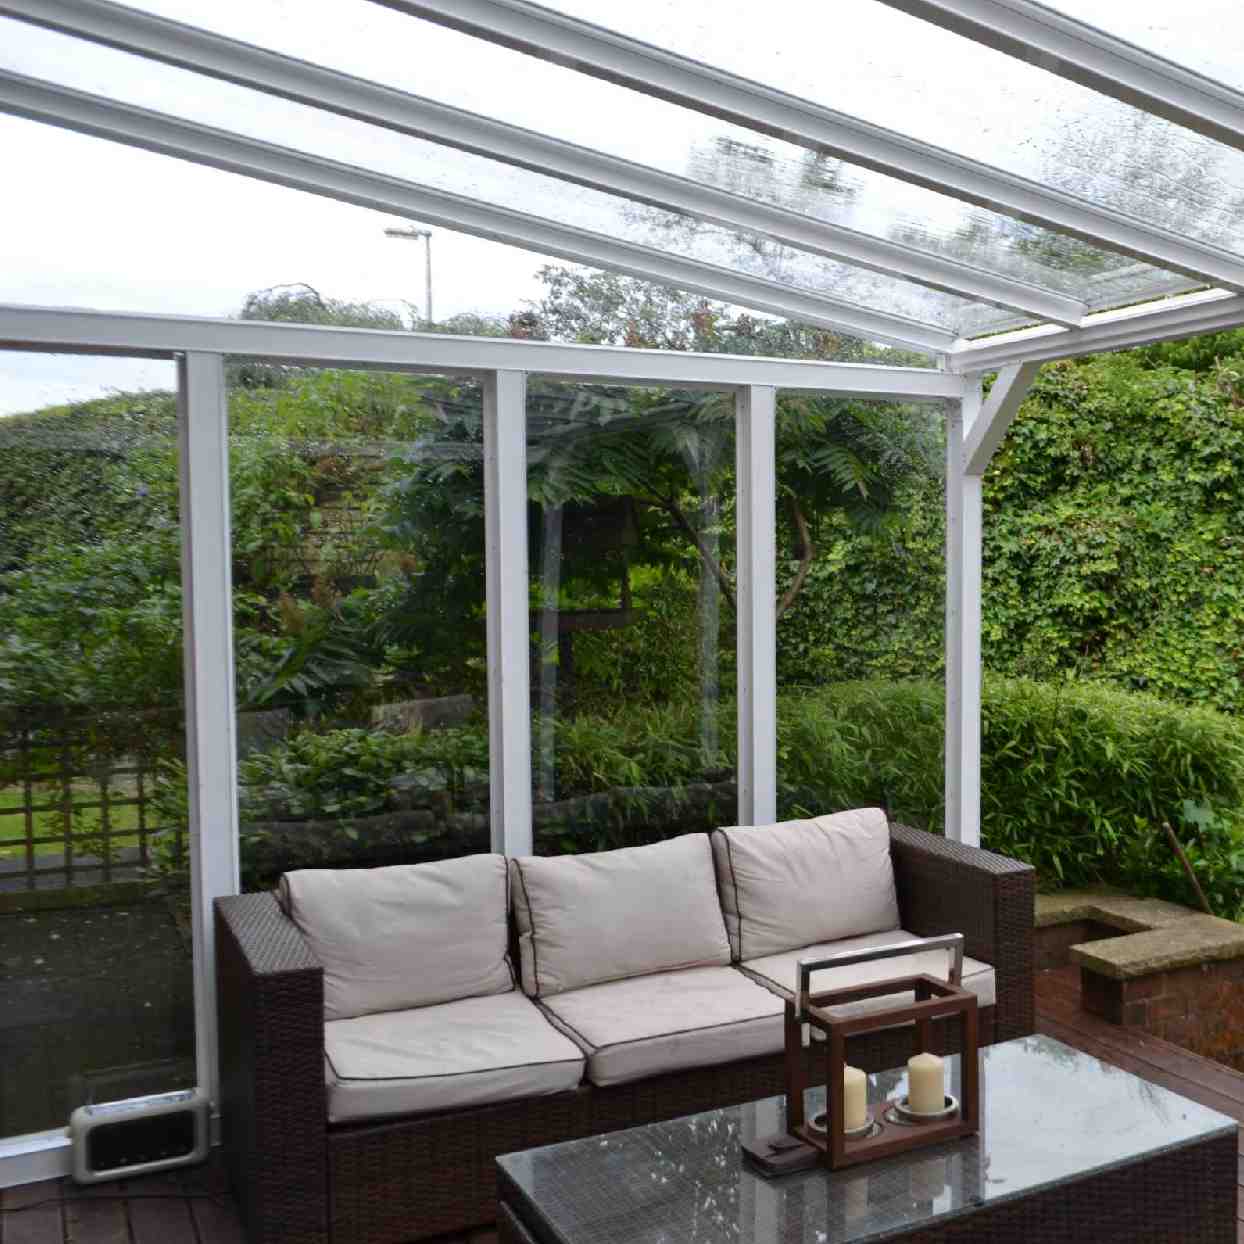 Buy Omega Verandah White with 16mm Polycarbonate Glazing - 9.2m (W) x 4.0m (P), (5) Supporting Posts online today